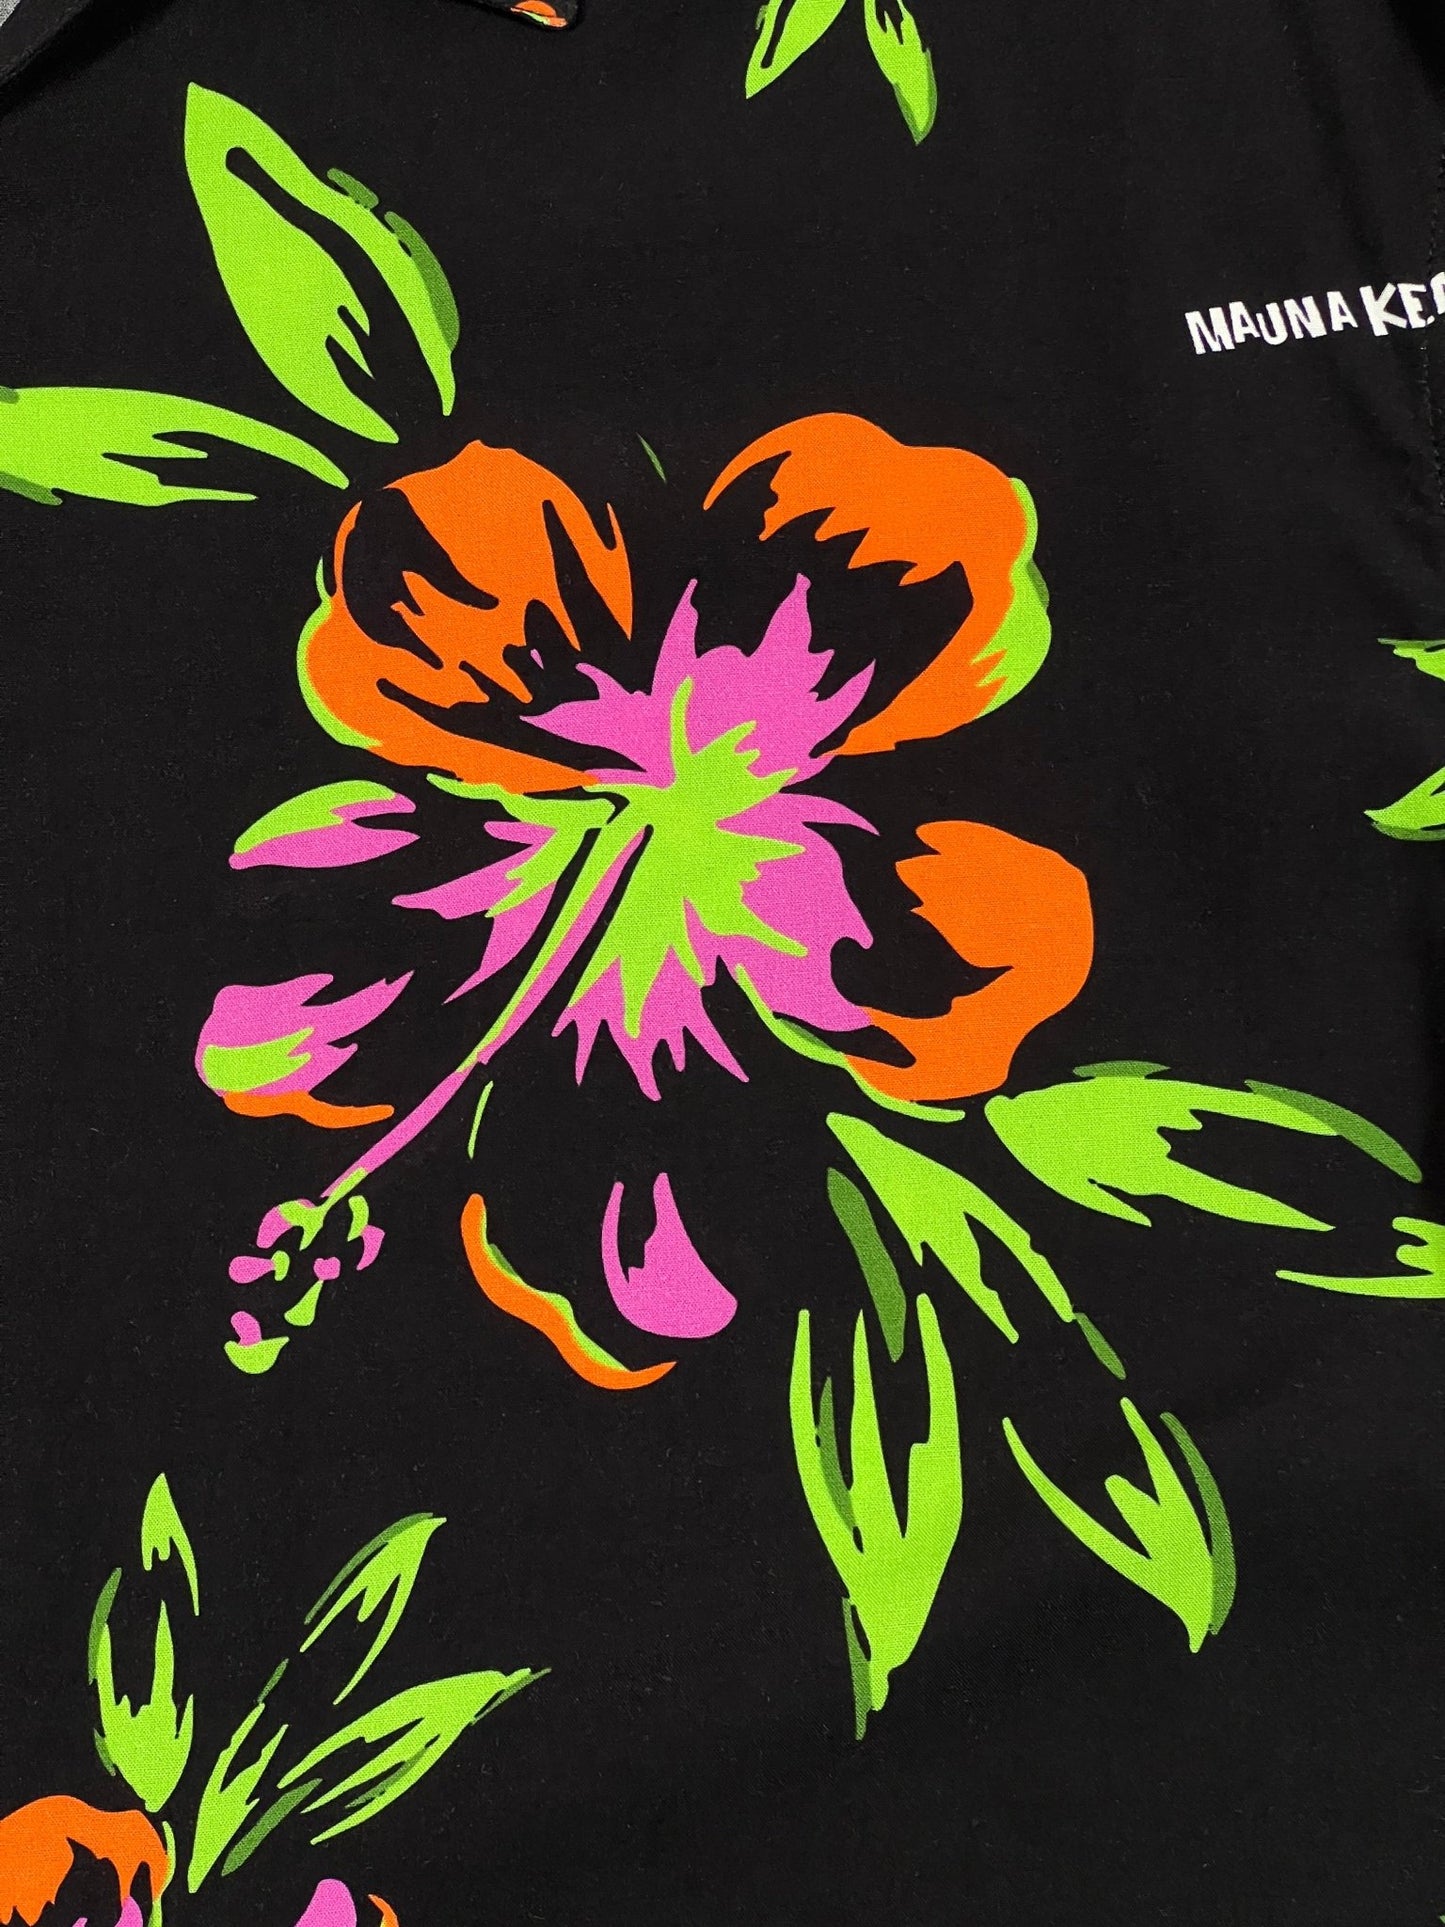 A vibrant graphic roses print with neon green and orange colors on a black fabric, featuring text "MAUNA-KEA" on top.